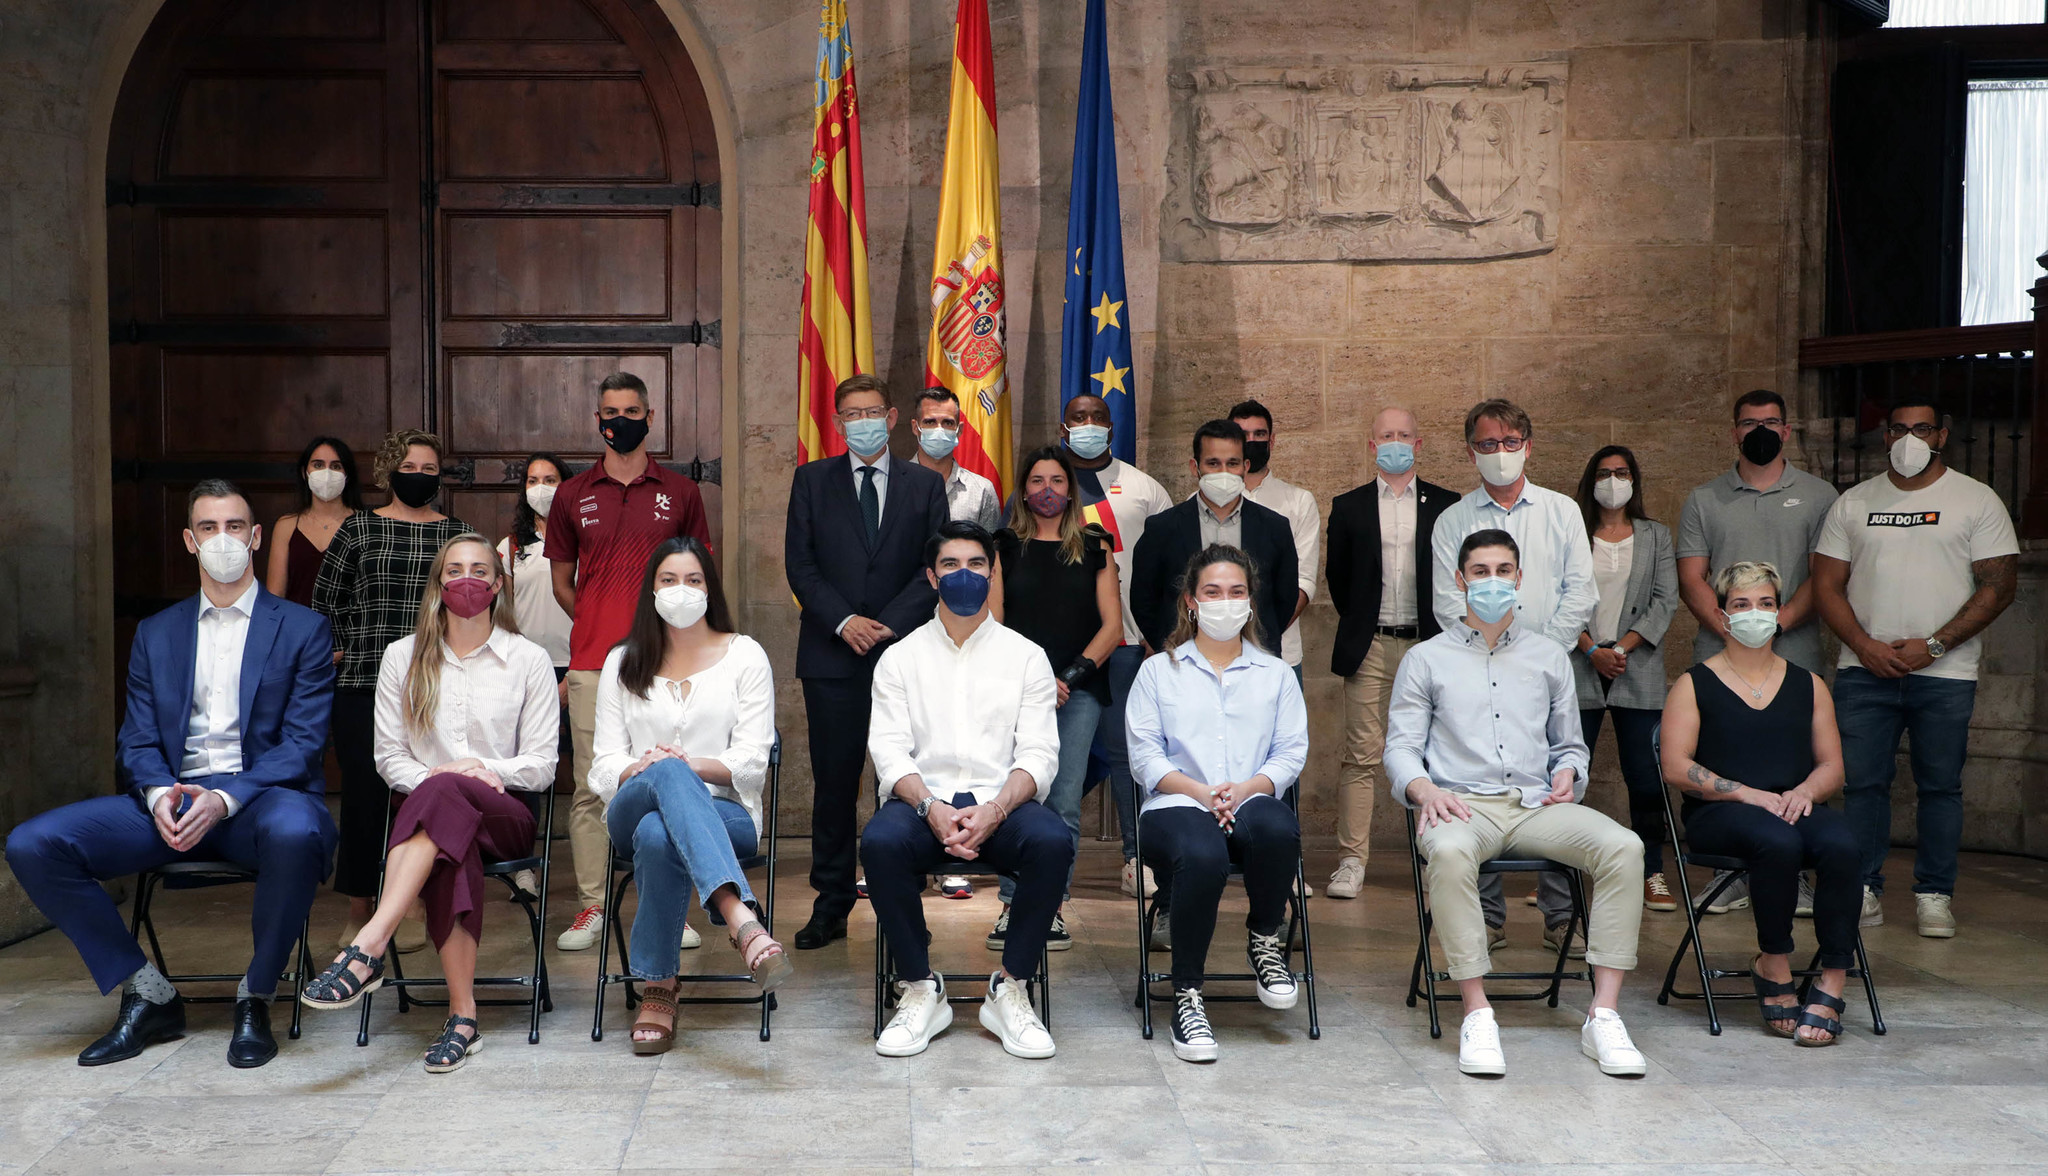 Family photo of all athletes with the president of the Generalitat, Ximo Puig.